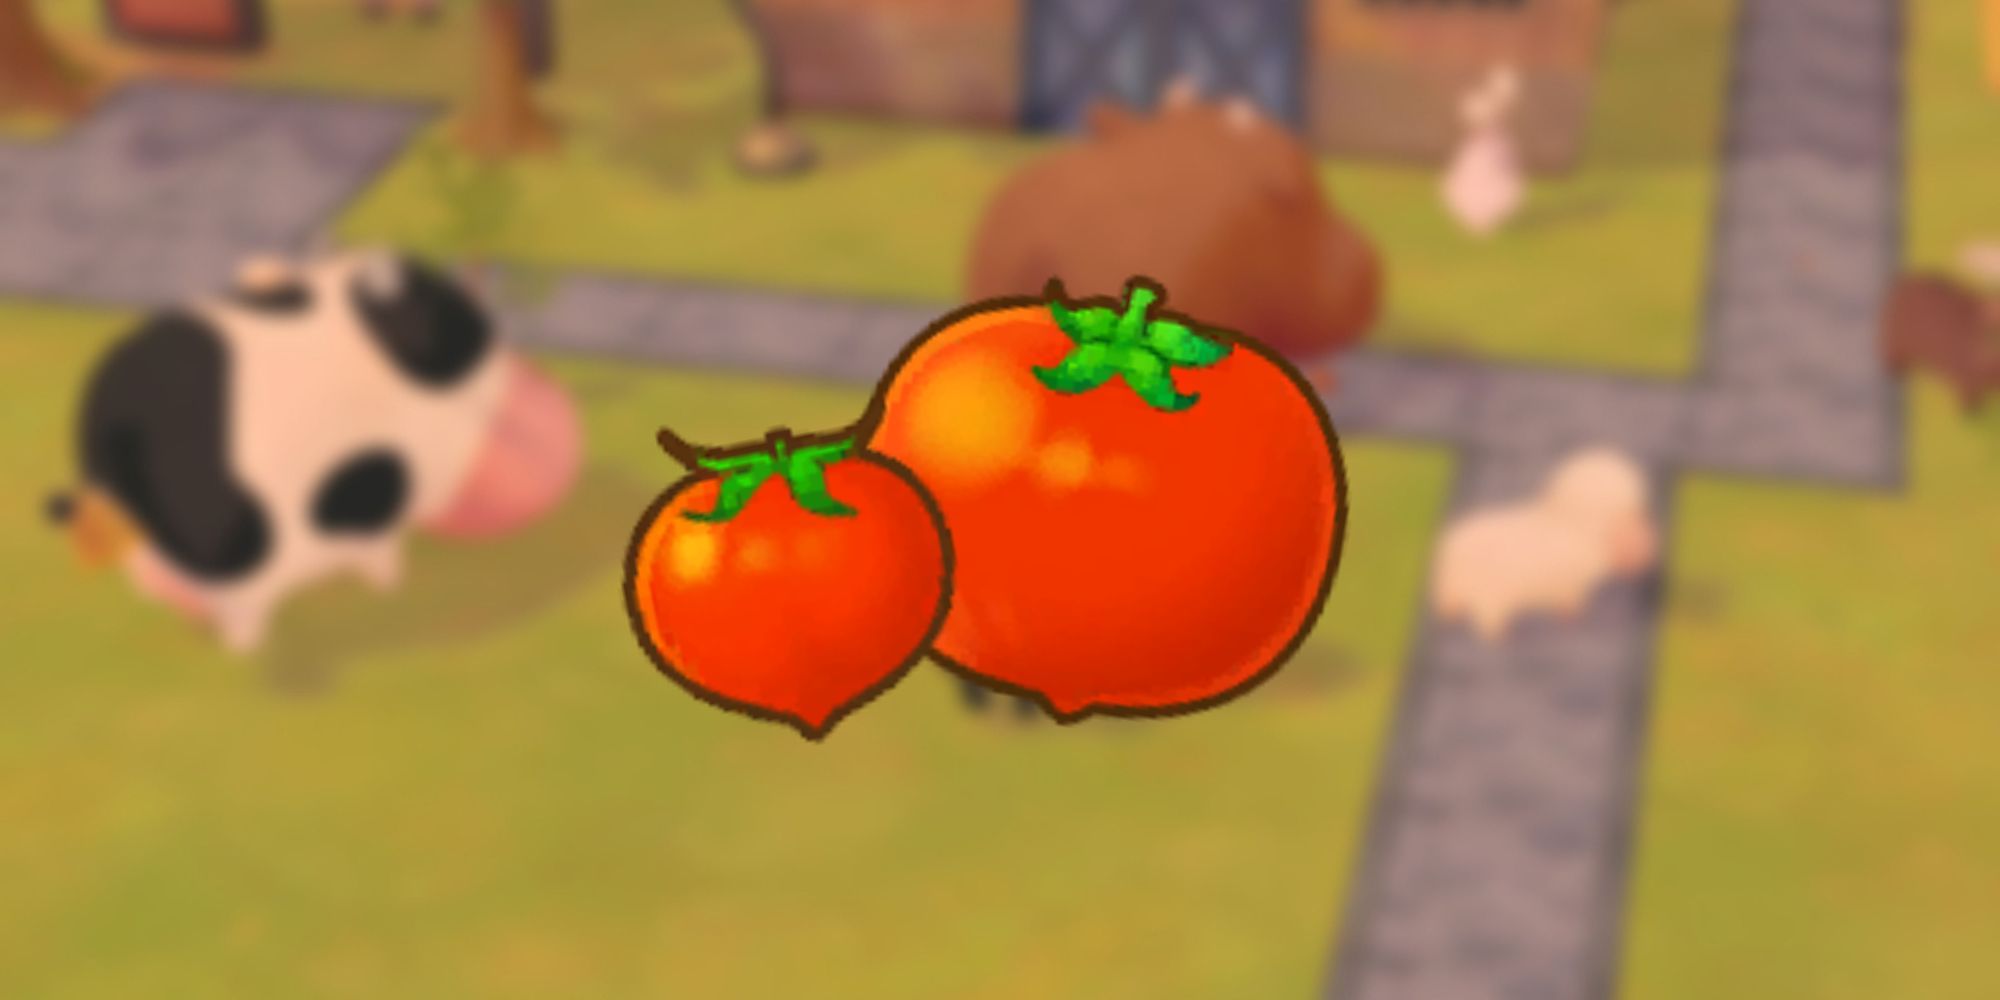 Tomato and Giant Tomato icon as it would be seen in players inventory over blurred background of player and cows in game